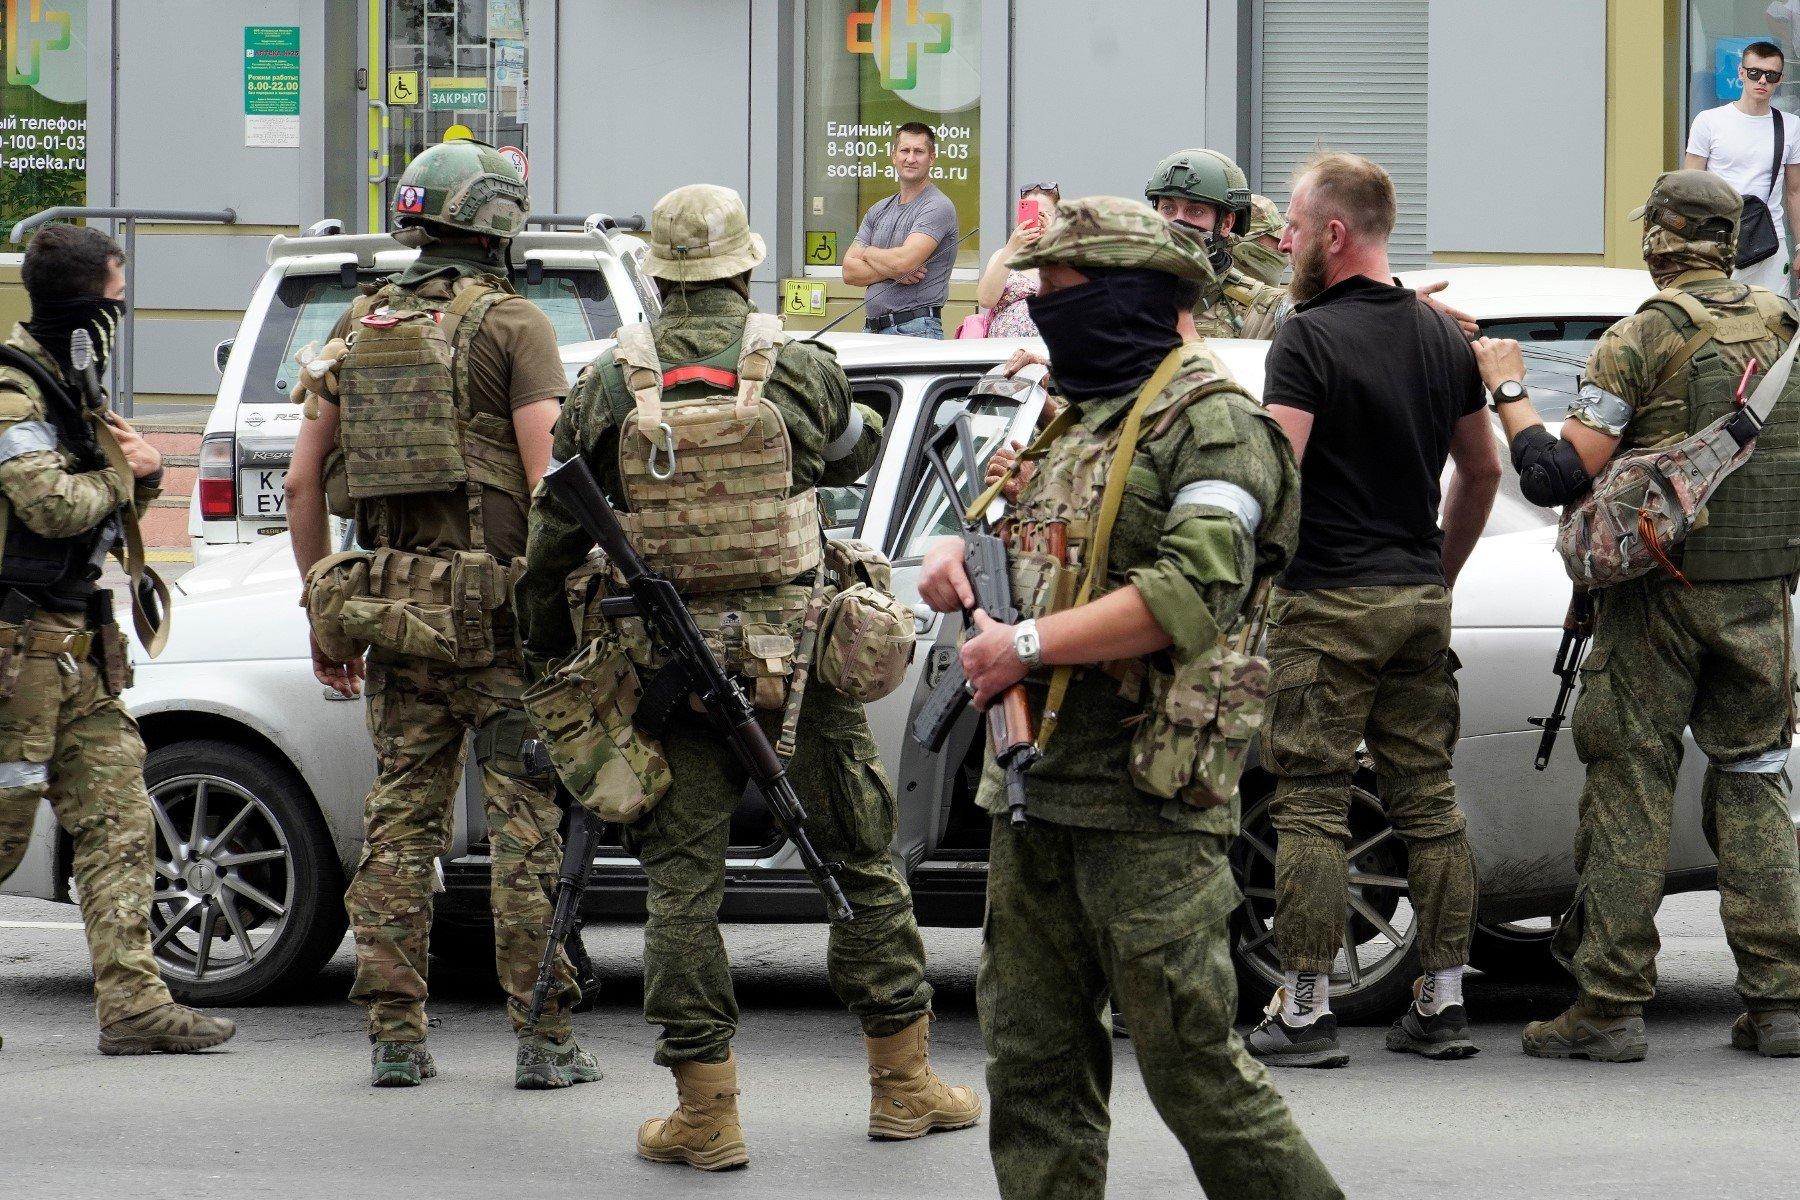 Members of Wagner group inspect a car in a street of Rostov-on-Don, on June 24, 2023. - President Vladimir Putin on June 24, 2023 said an armed mutiny by Wagner mercenaries was a "stab in the back" and that the group's chief Yevgeny Prigozhin had betrayed Russia, as he vowed to punish the dissidents. Prigozhin said his fighters control key military sites in the southern city of Rostov-on-Don. (Photo by STRINGER / AFP)